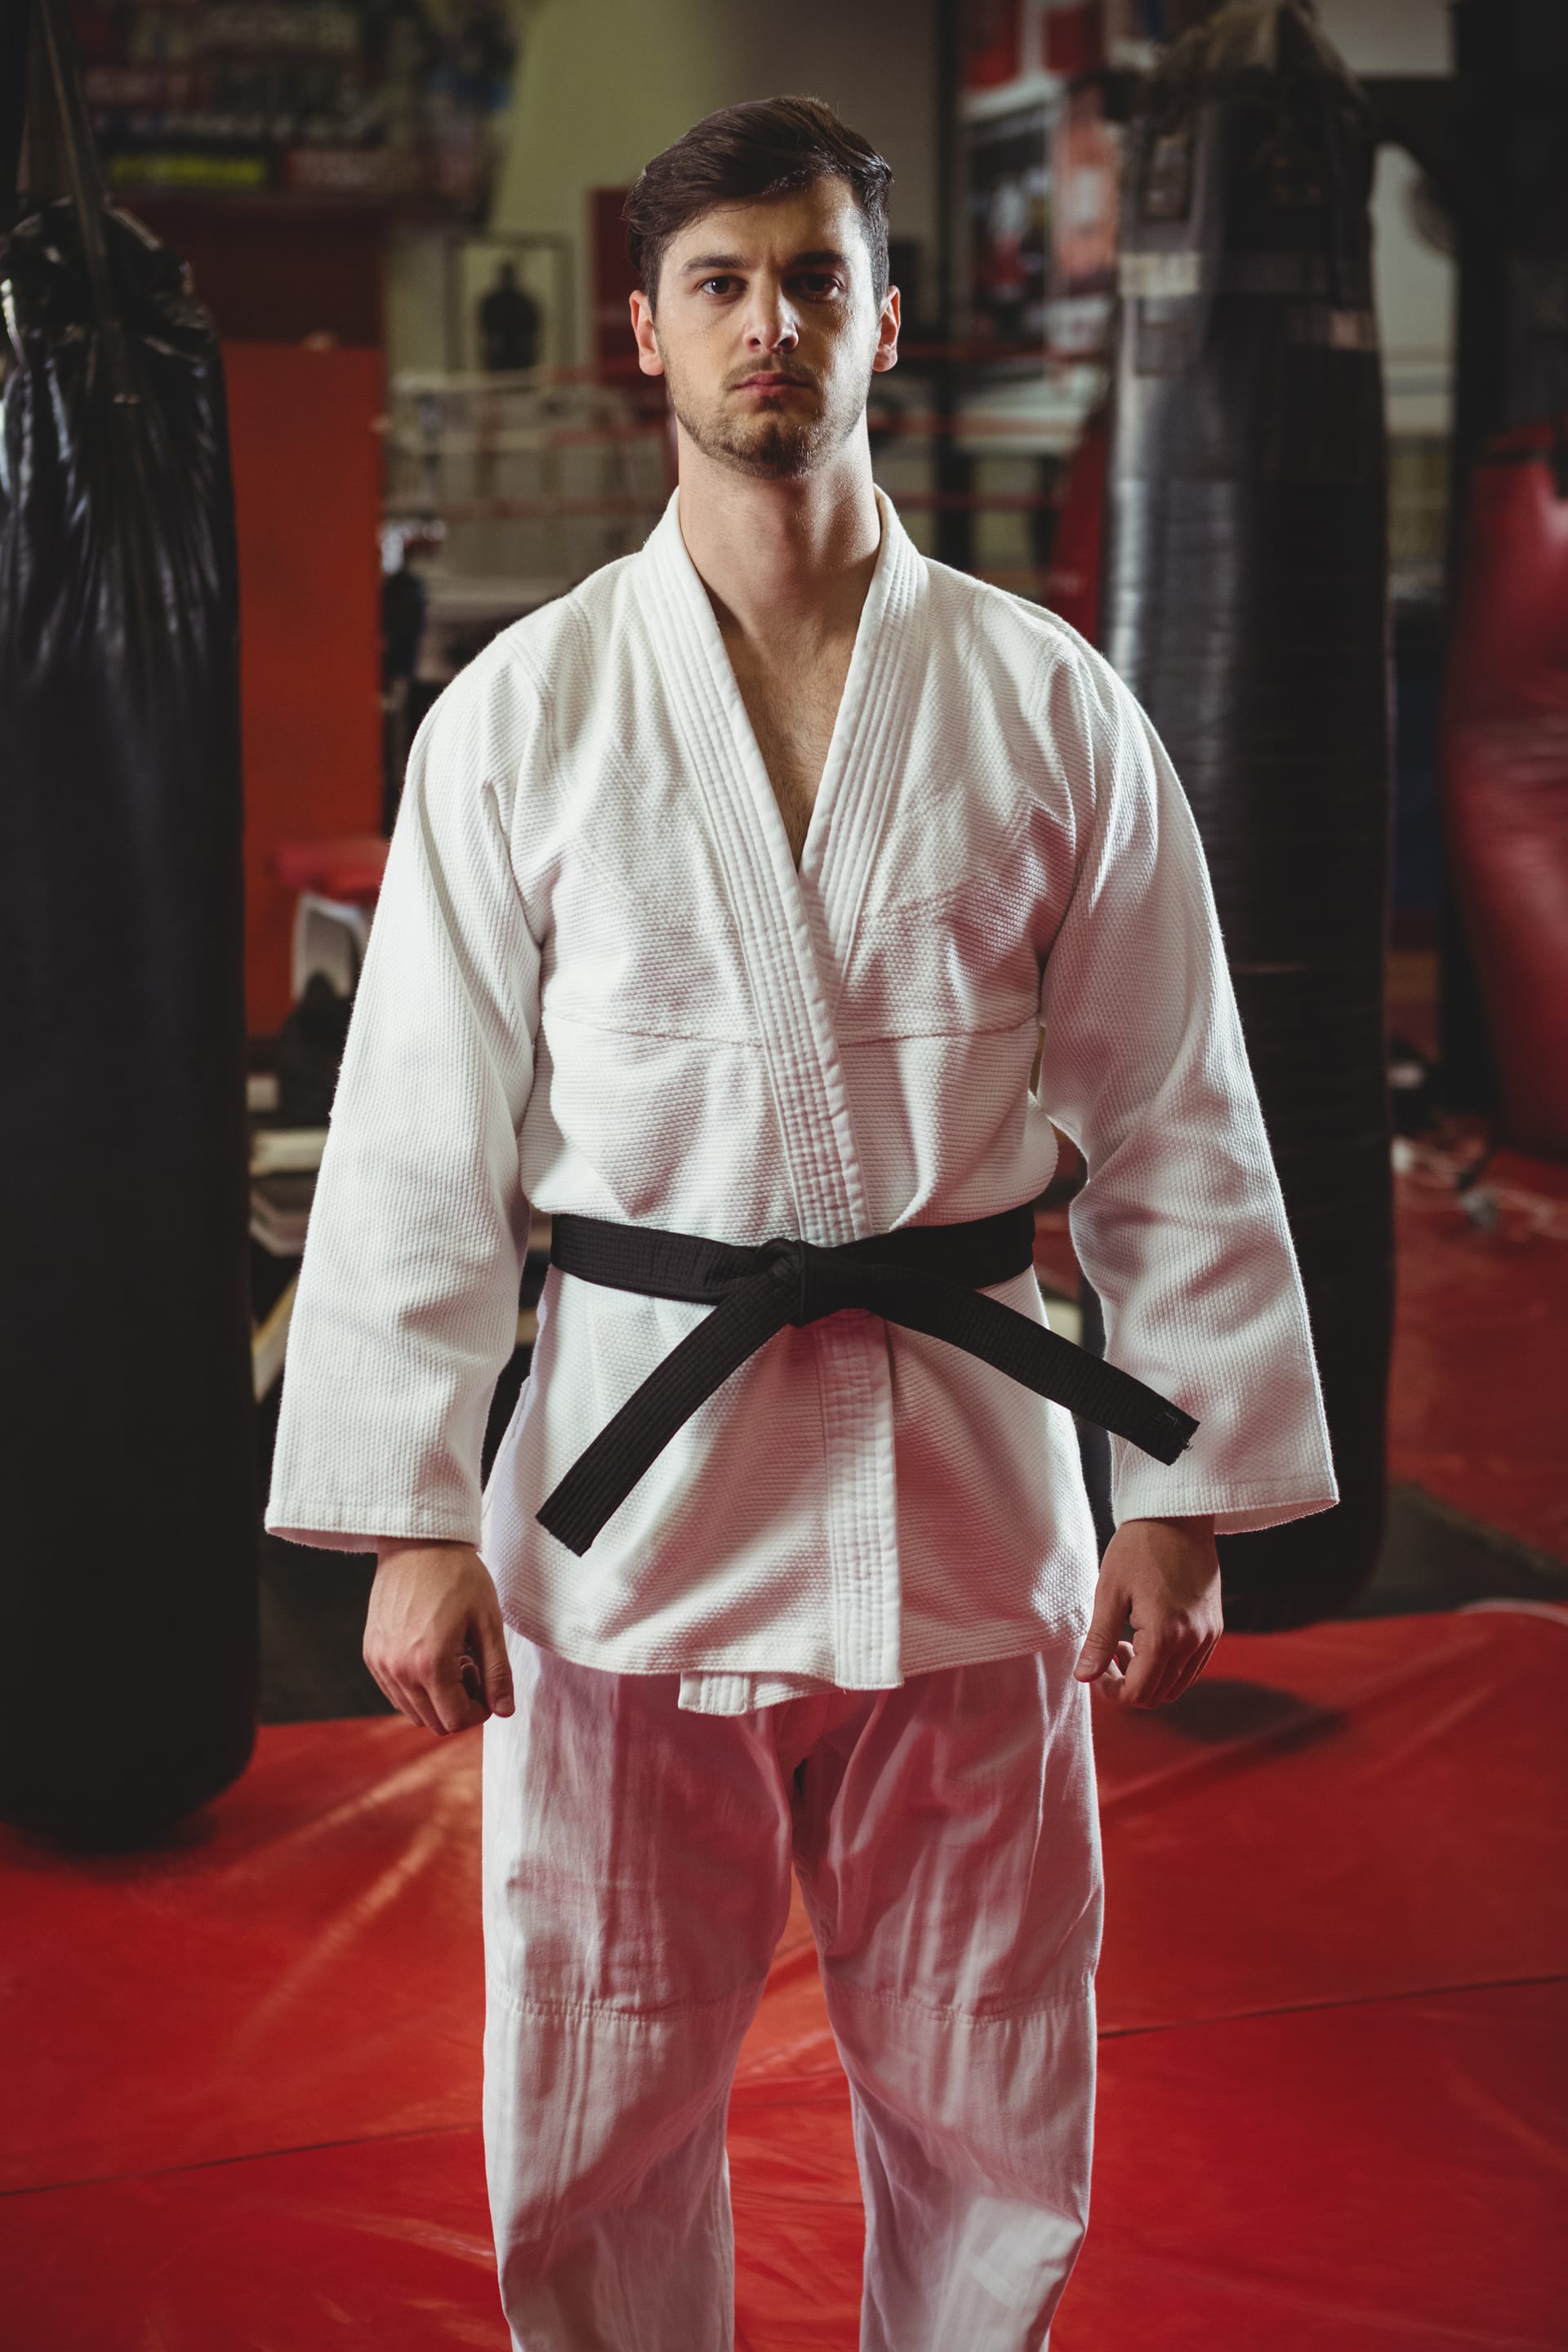 Guy profile picture karate player posing